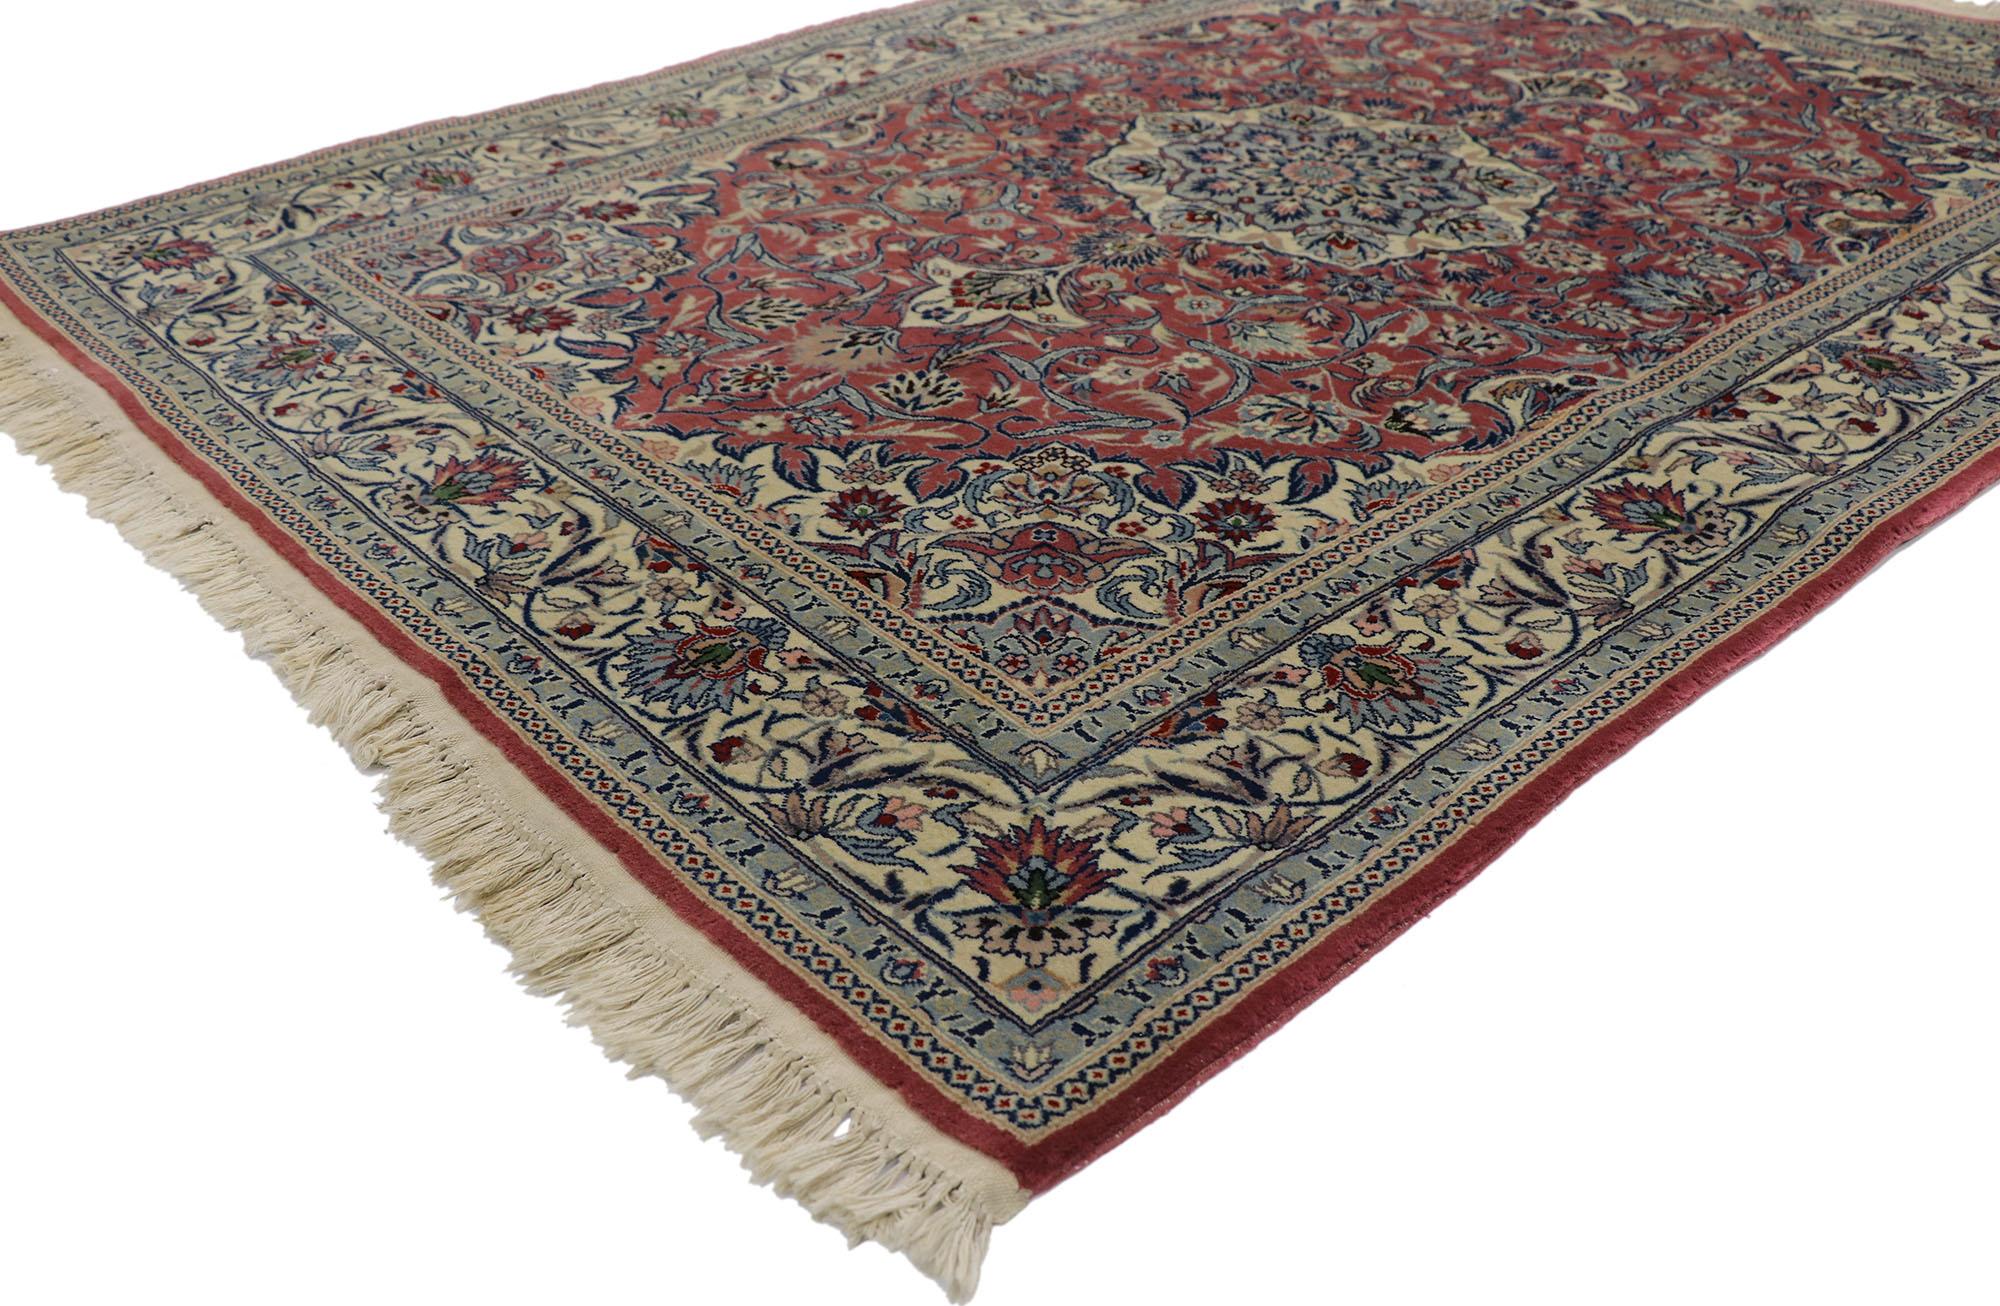 78137 Vintage Chinese Tabriz rug with traditional style, 04'02 x 06'02.
Emanating traditional style with incredible detail and texture, this hand knotted Chinese Tabriz rug is a captivating vision of woven beauty. The timeless botanical design and